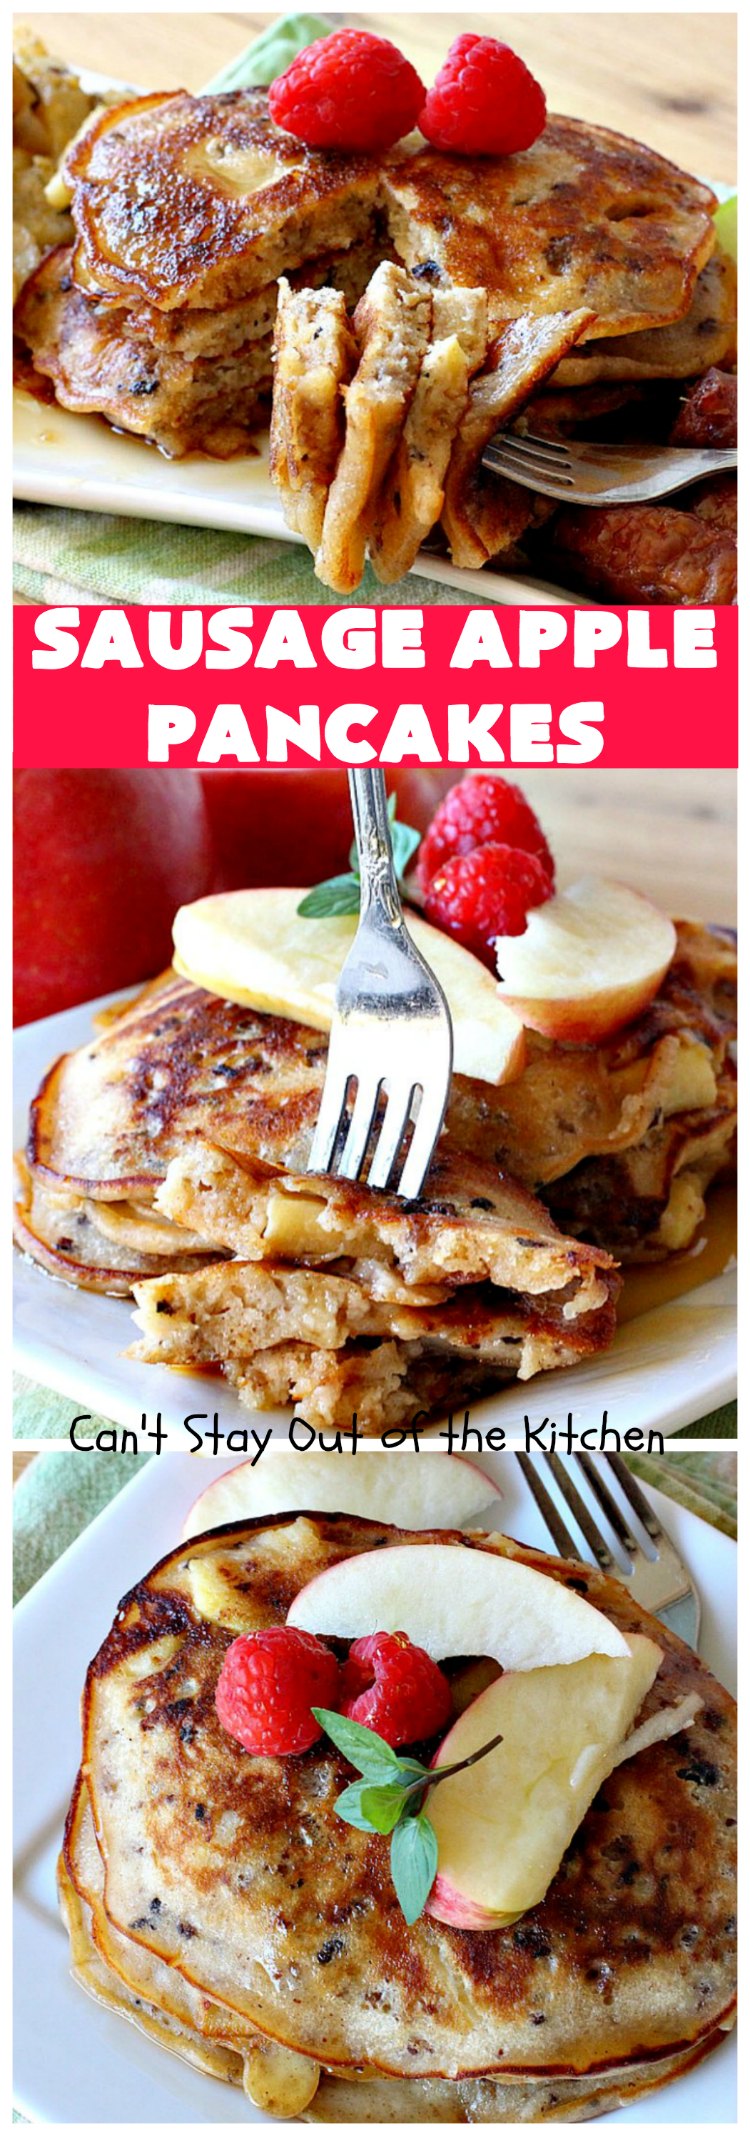 Sausage Apple Pancakes | Can't Stay Out of the Kitchen